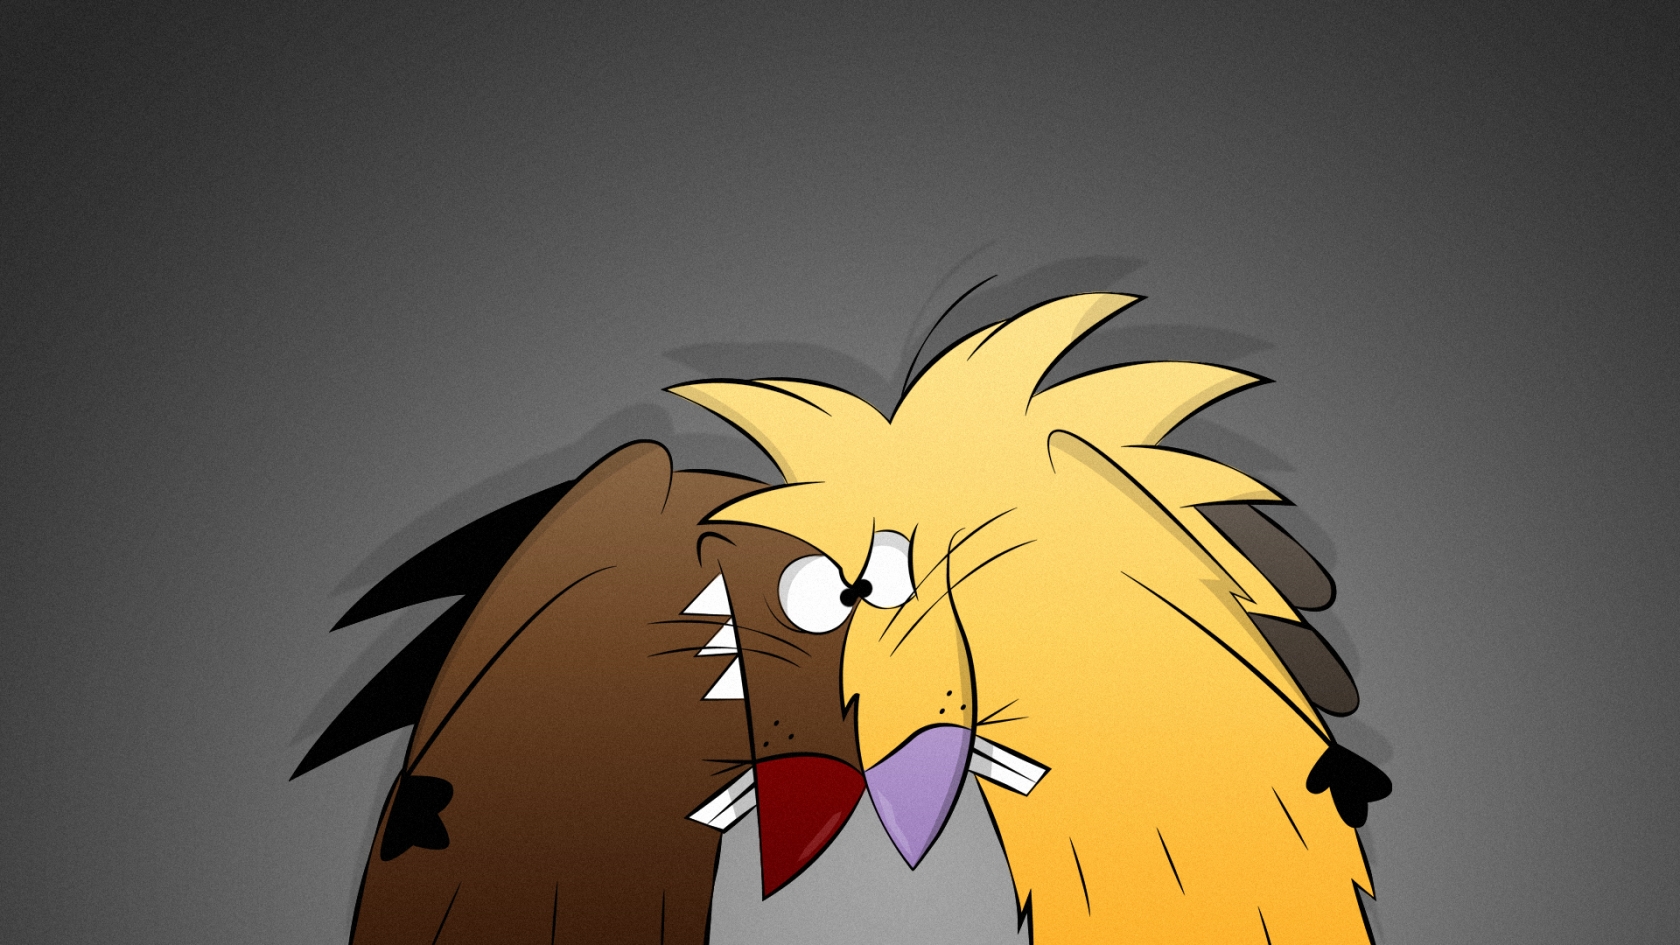 The Angry Beavers for 1680 x 945 HDTV resolution